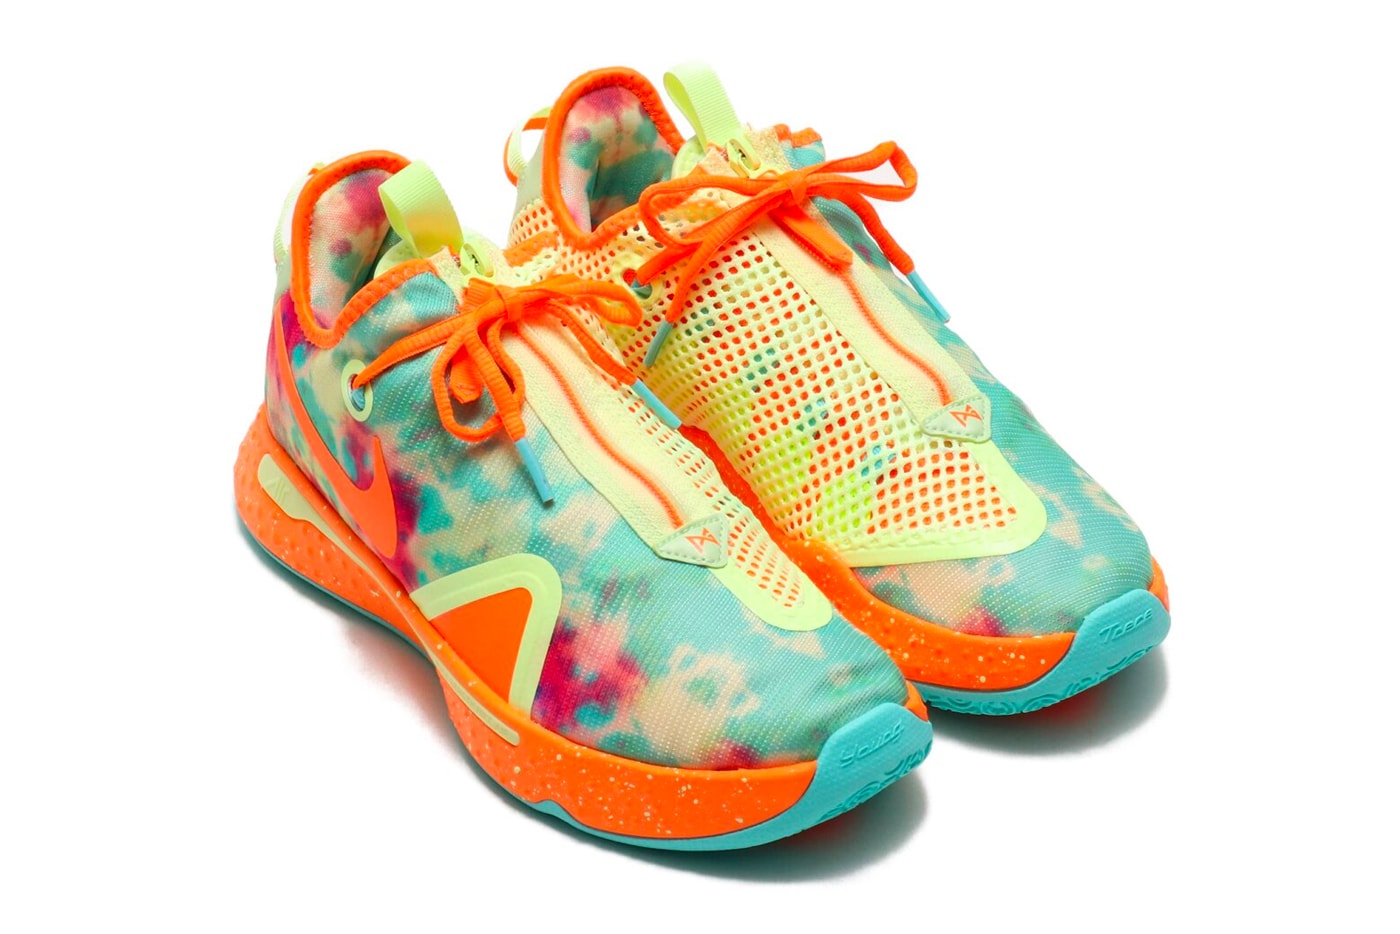 Gatorade Nike Drops PG 4 Barely Volt Total Orange VOLT PHOTO BLUE cd5086 700 paul george sneakers shoes footwear kicks trainers runners court basketball nba spring 2020 collection swoosh